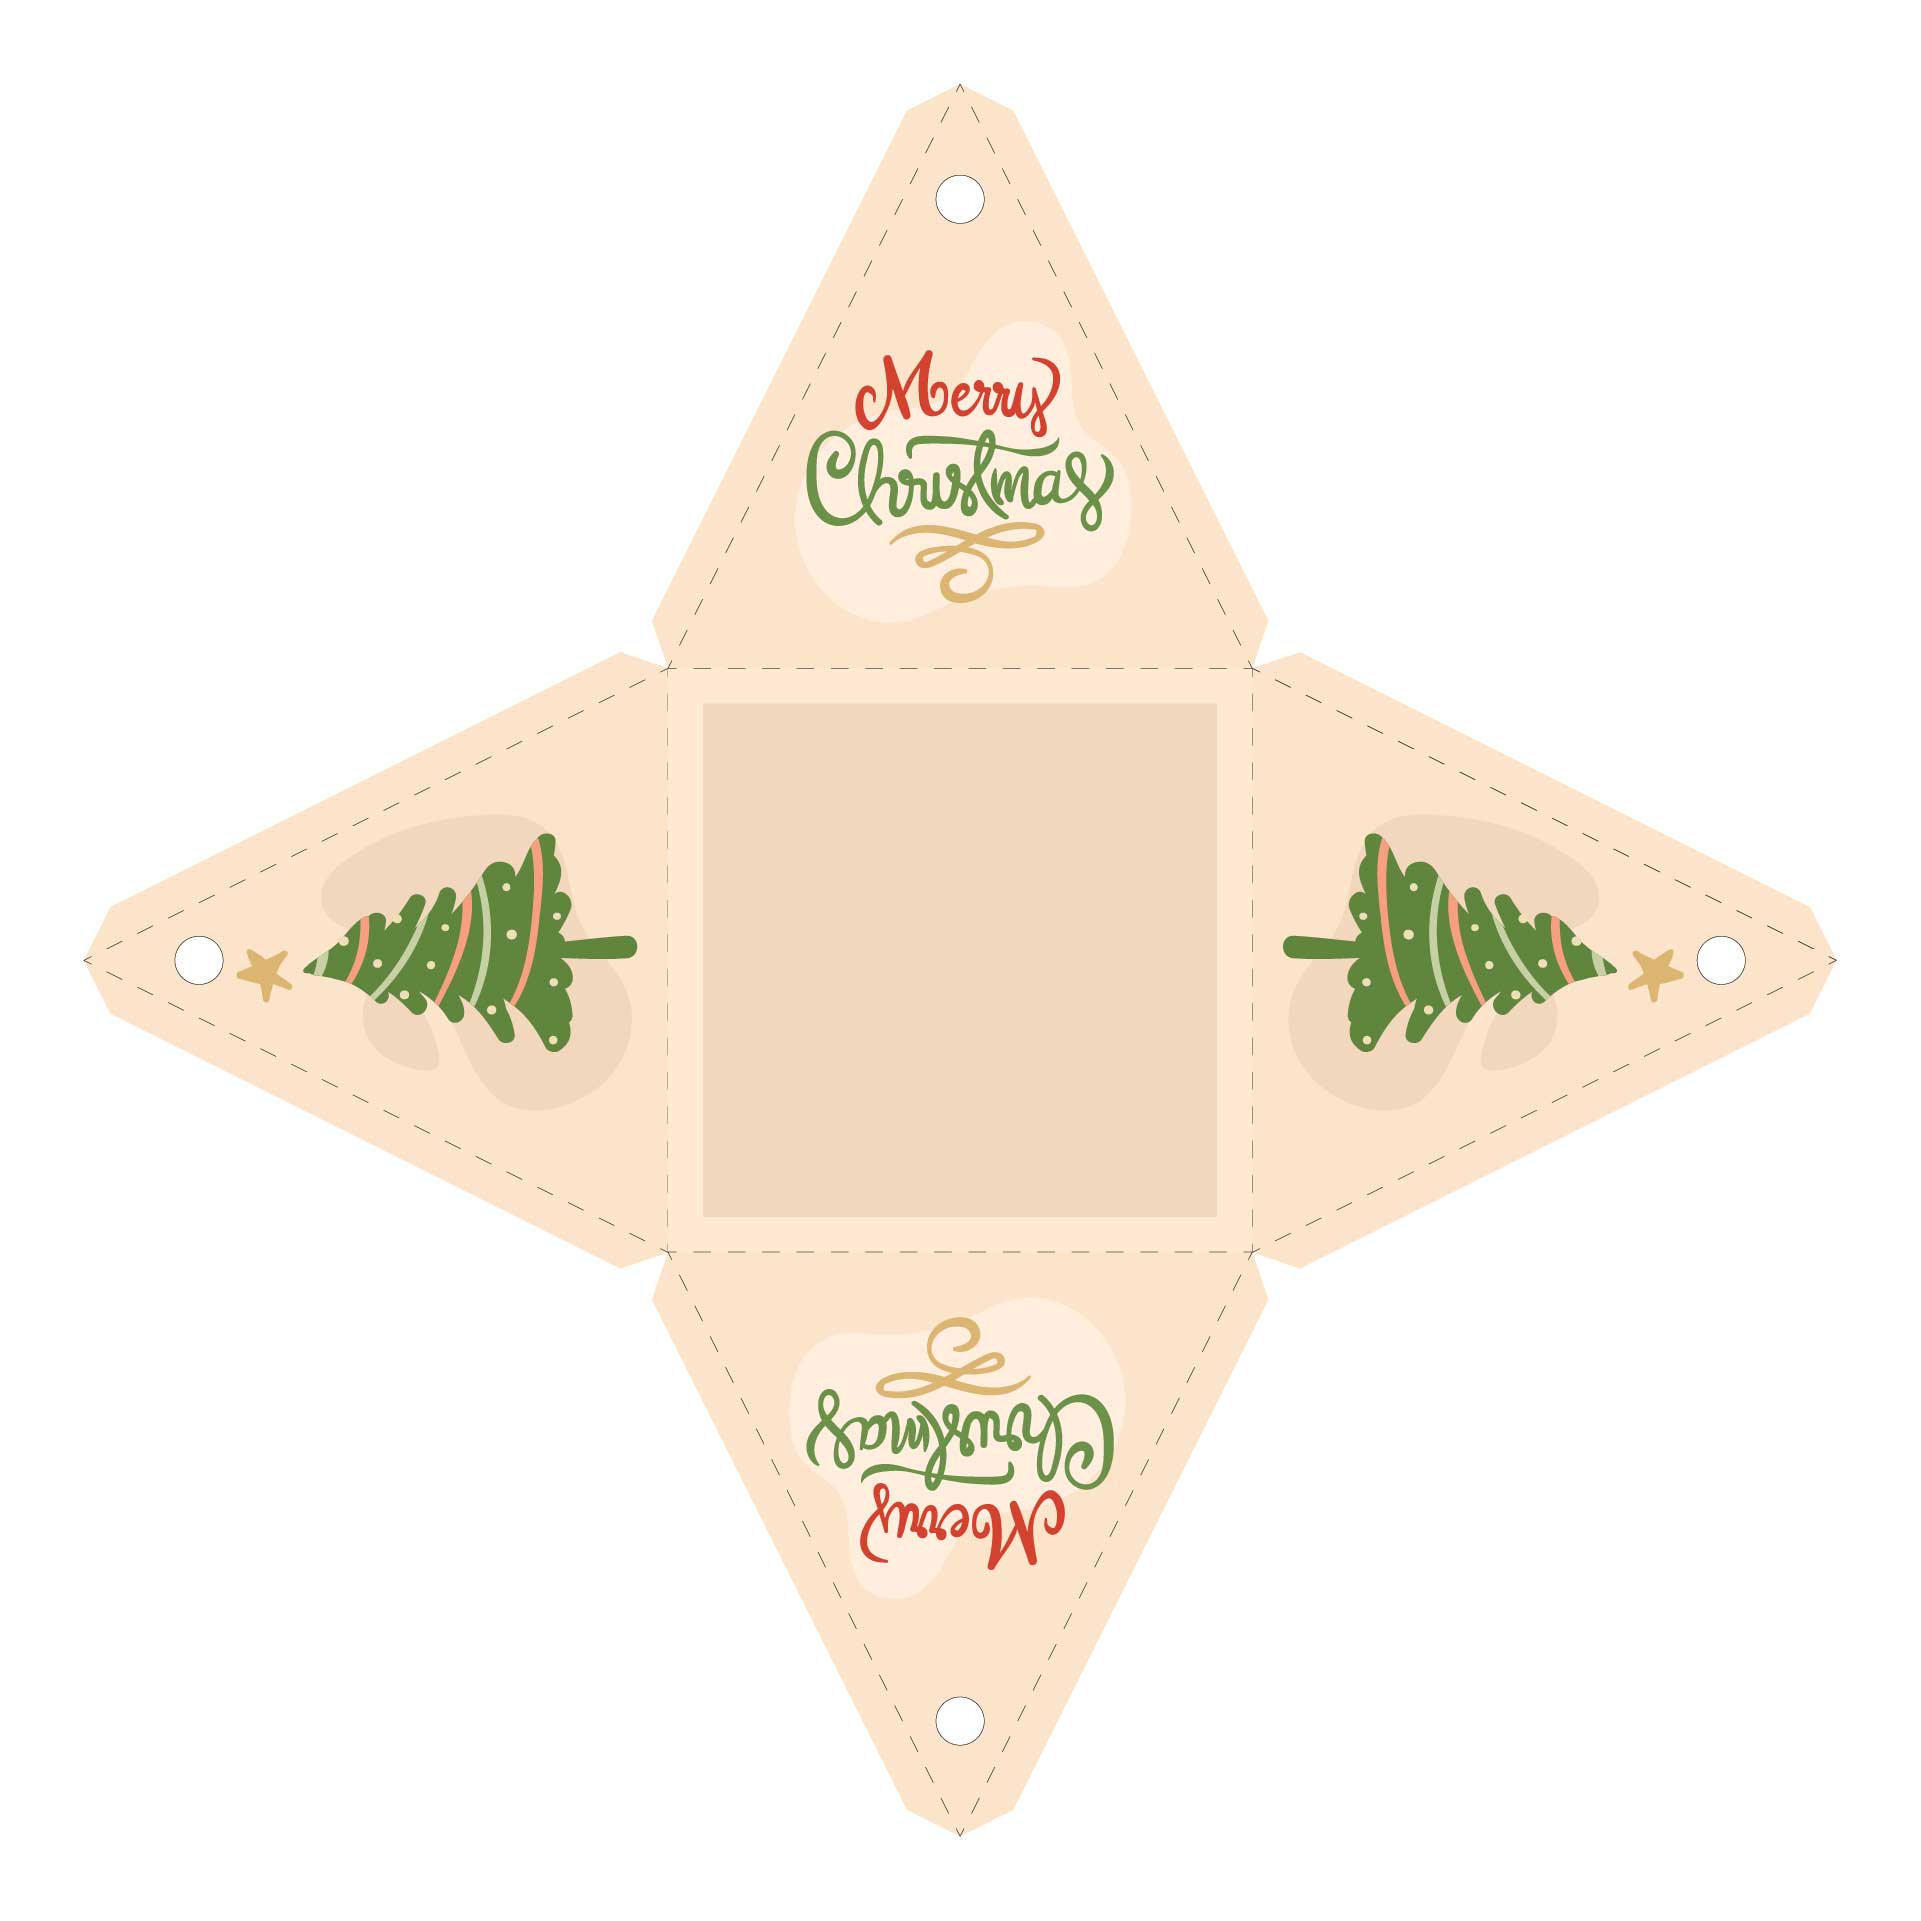 Cut-Out Christmas Box Templates